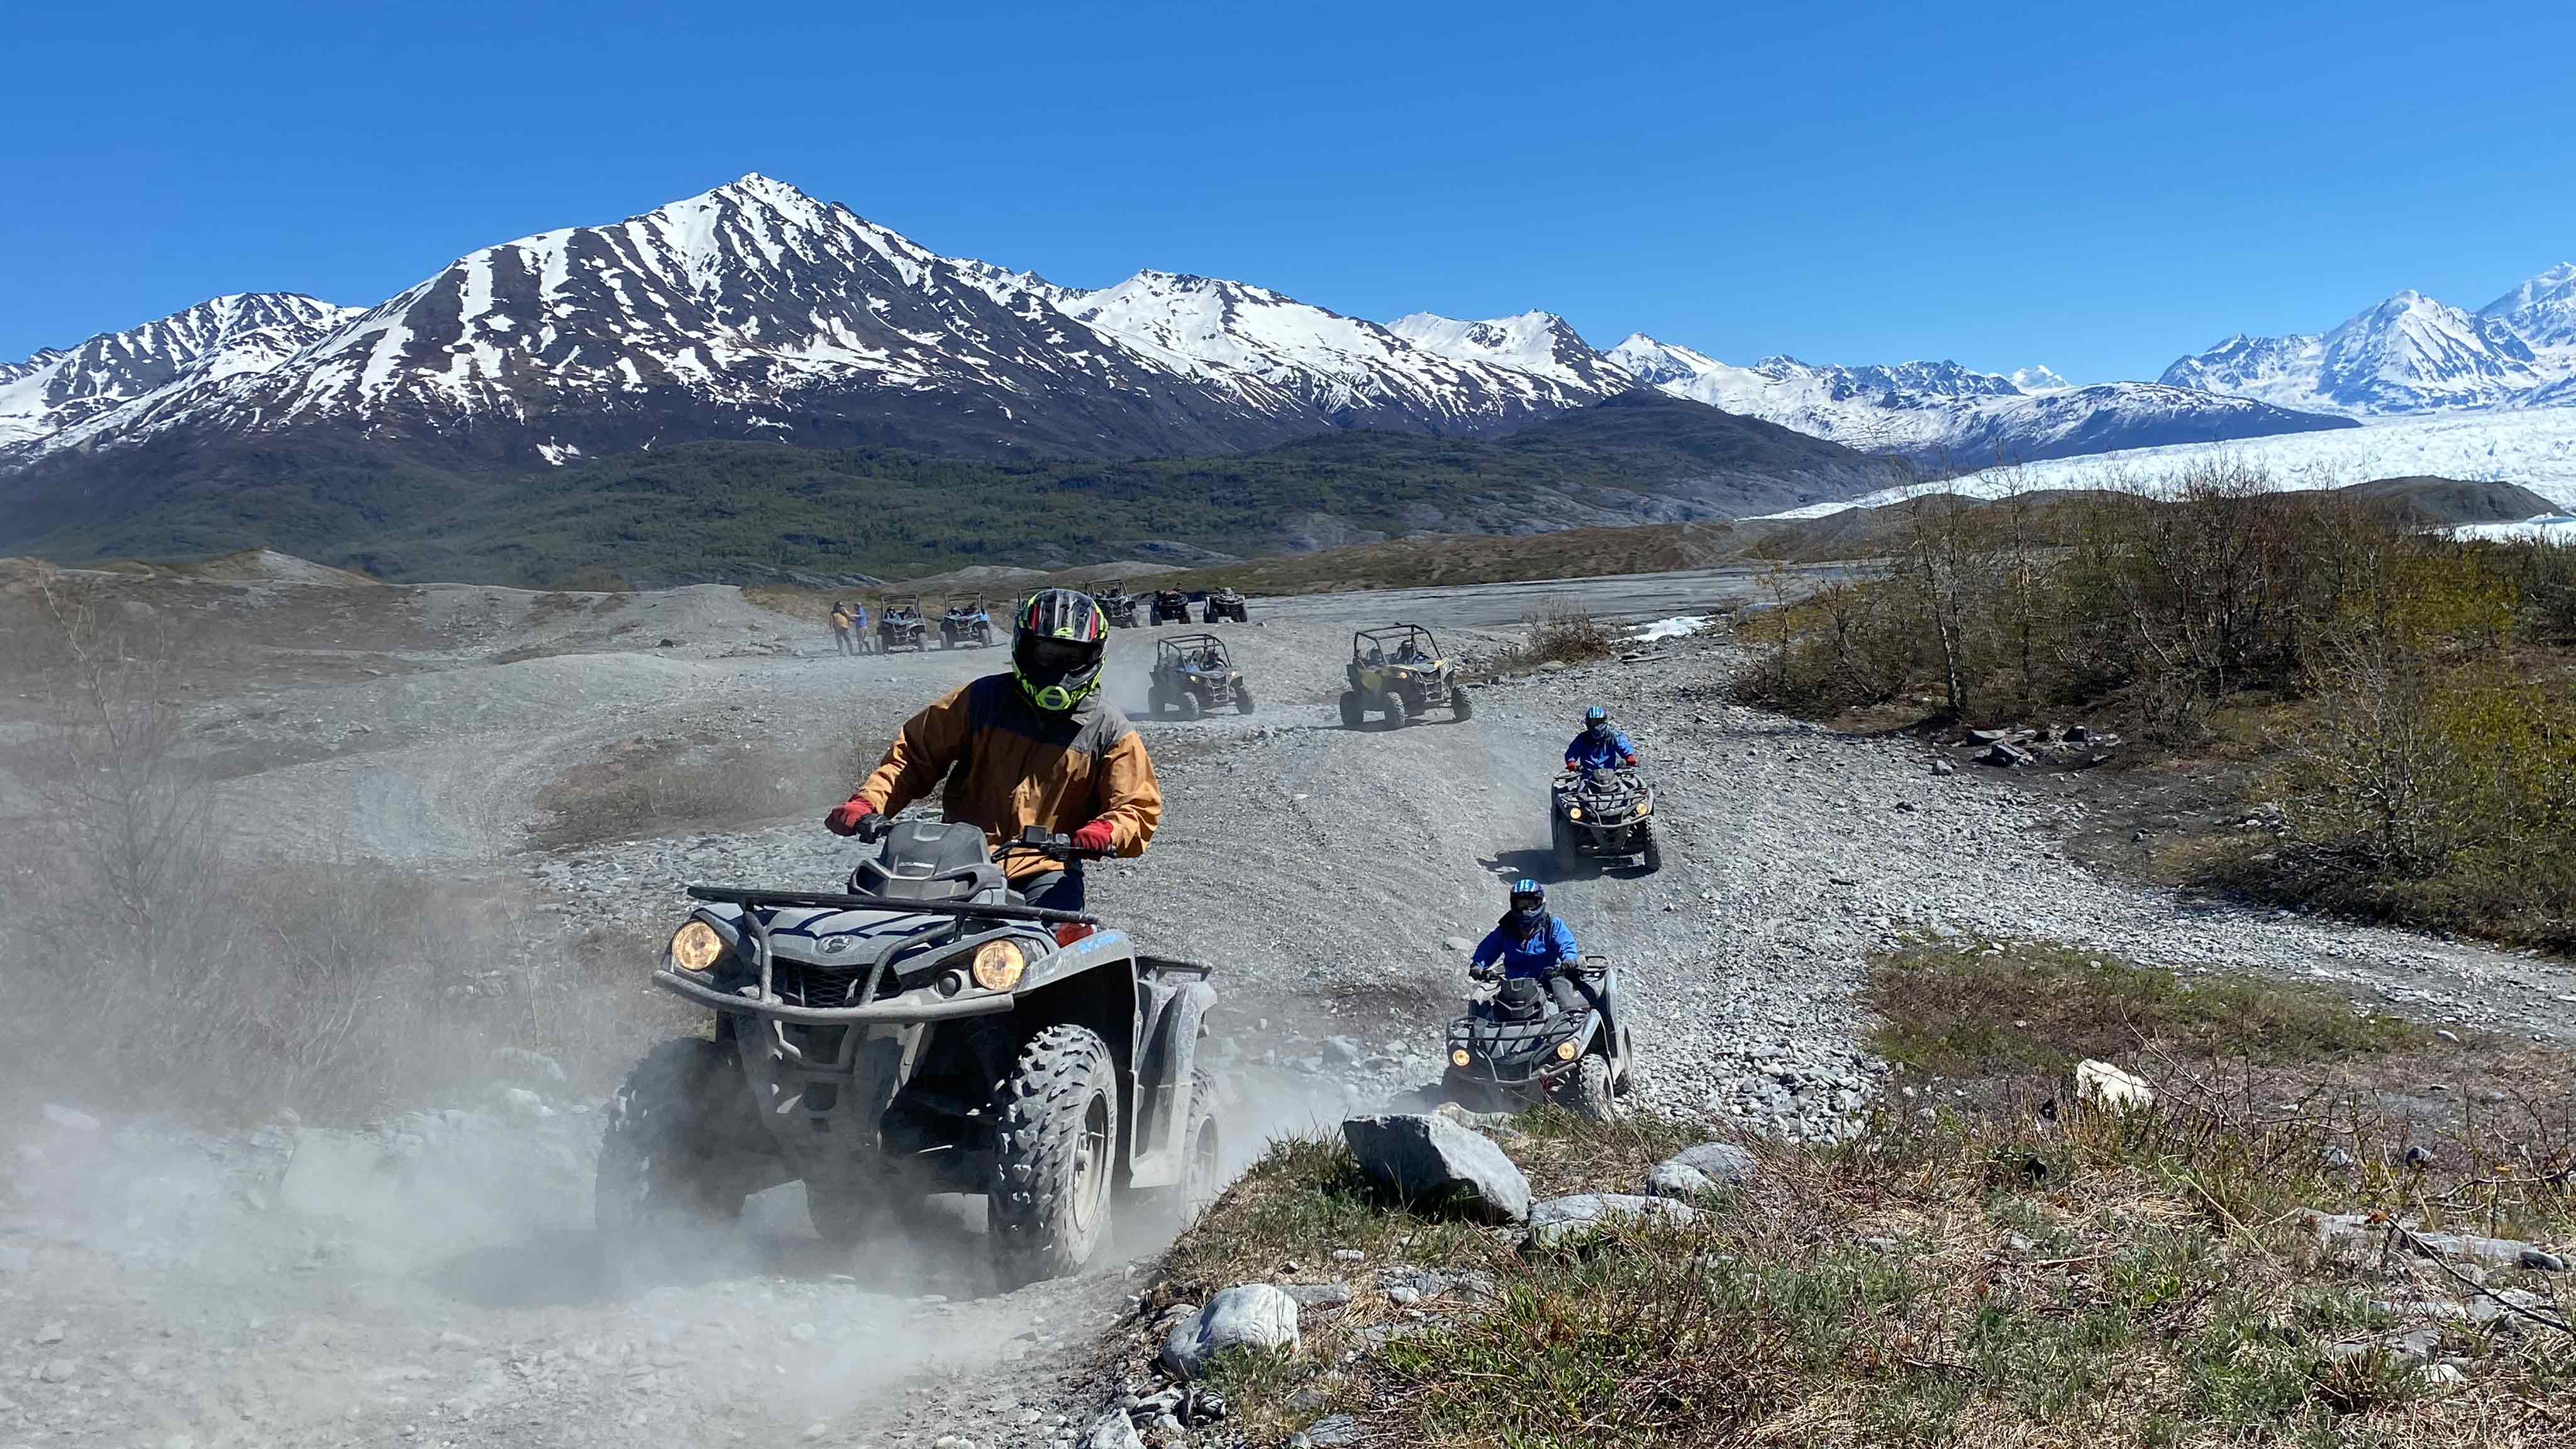 People ride off-road vehicles beneath snowcapped mountains